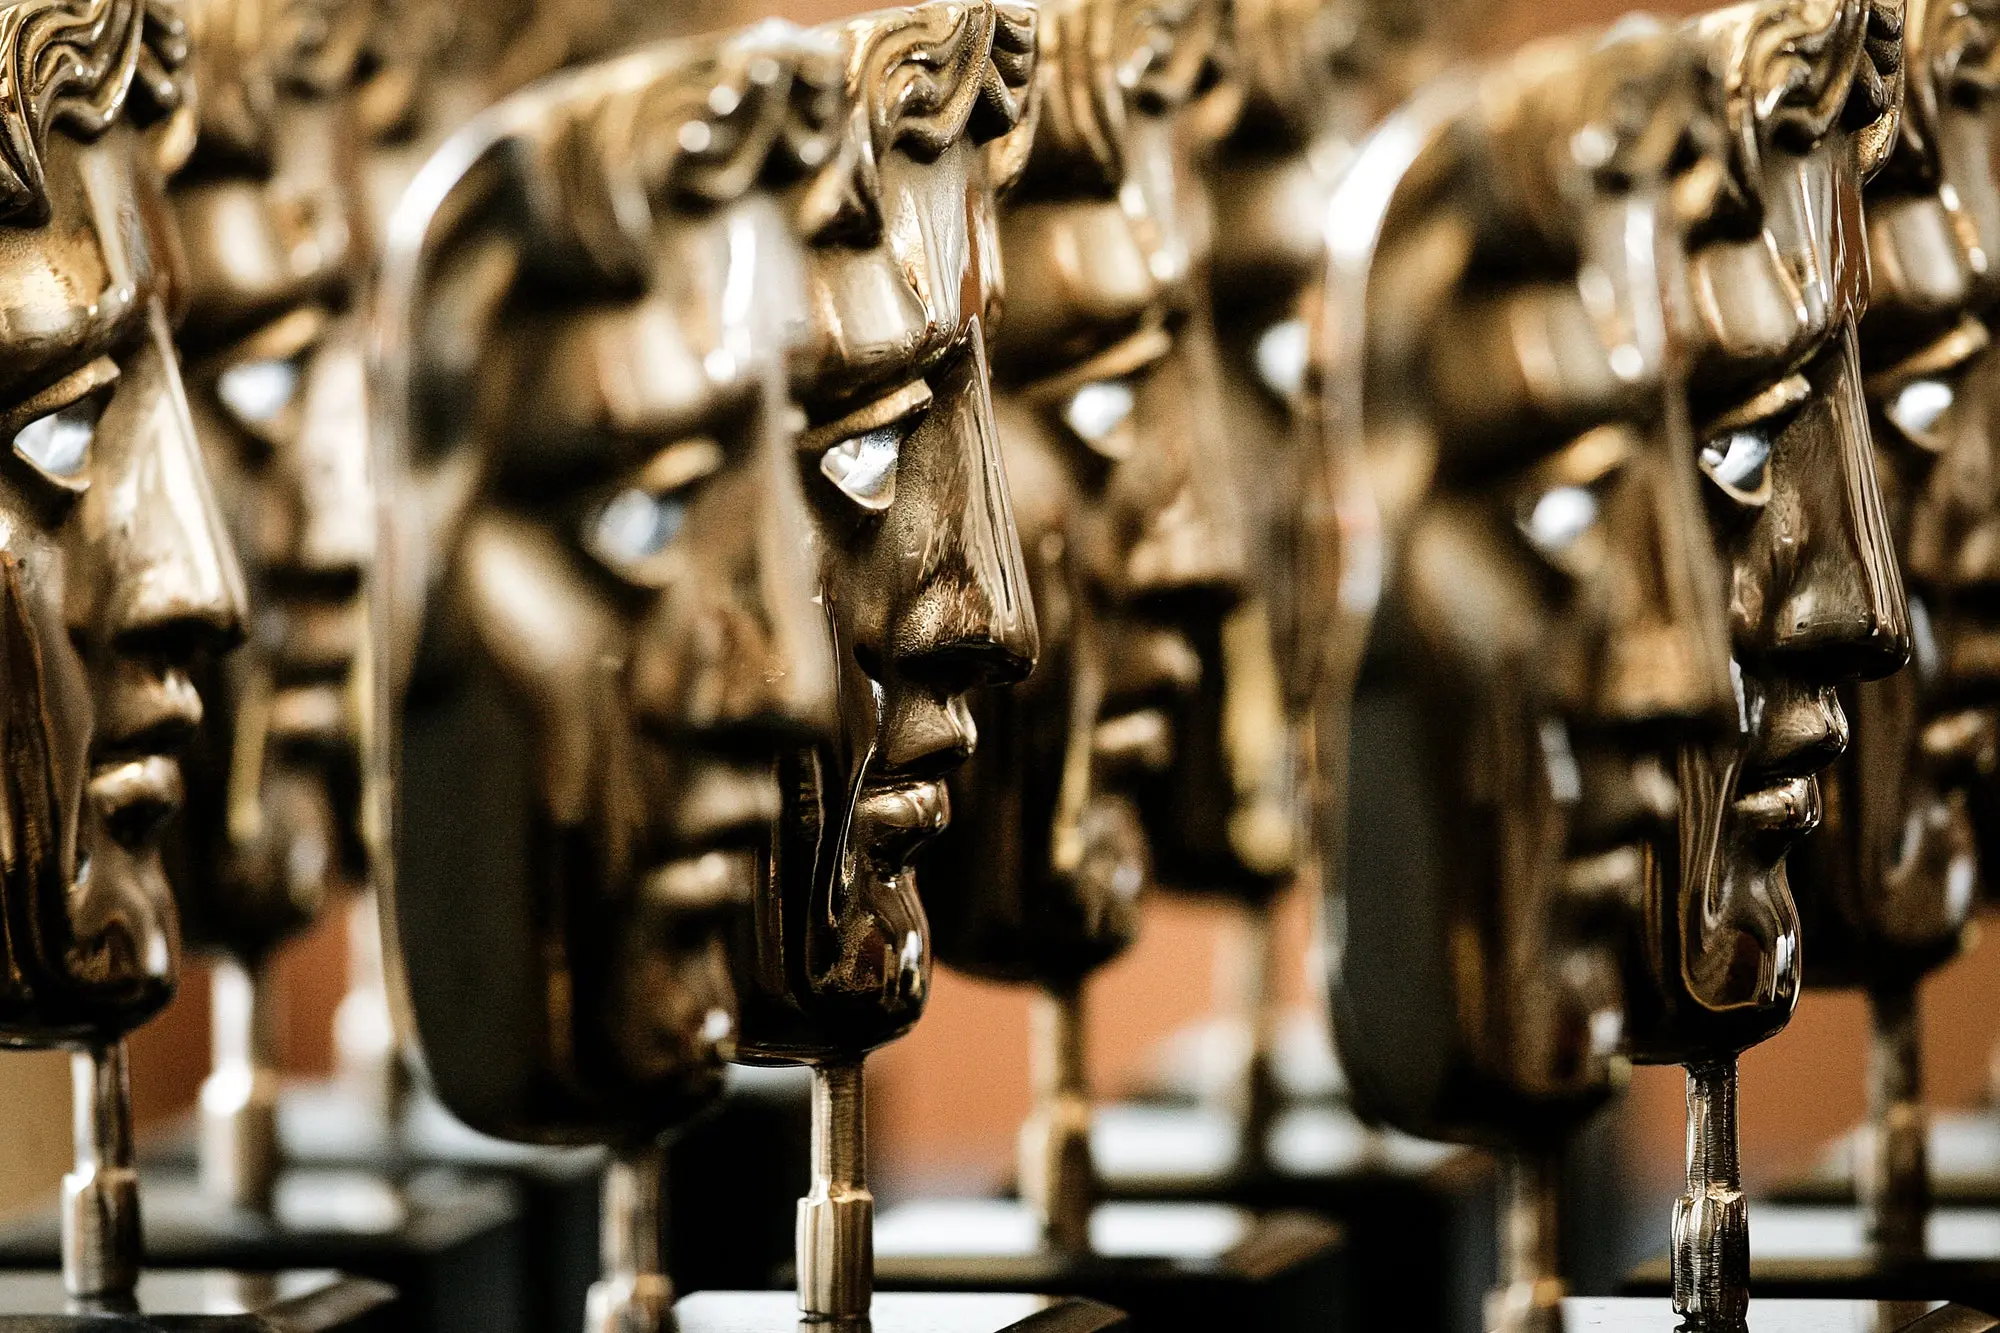 Our mission to enable Creativity for All has motivated Adobe to partner with the British Academy of Film and Television Arts (BAFTA) this year, in support of its Learning and Inclusivity programme.